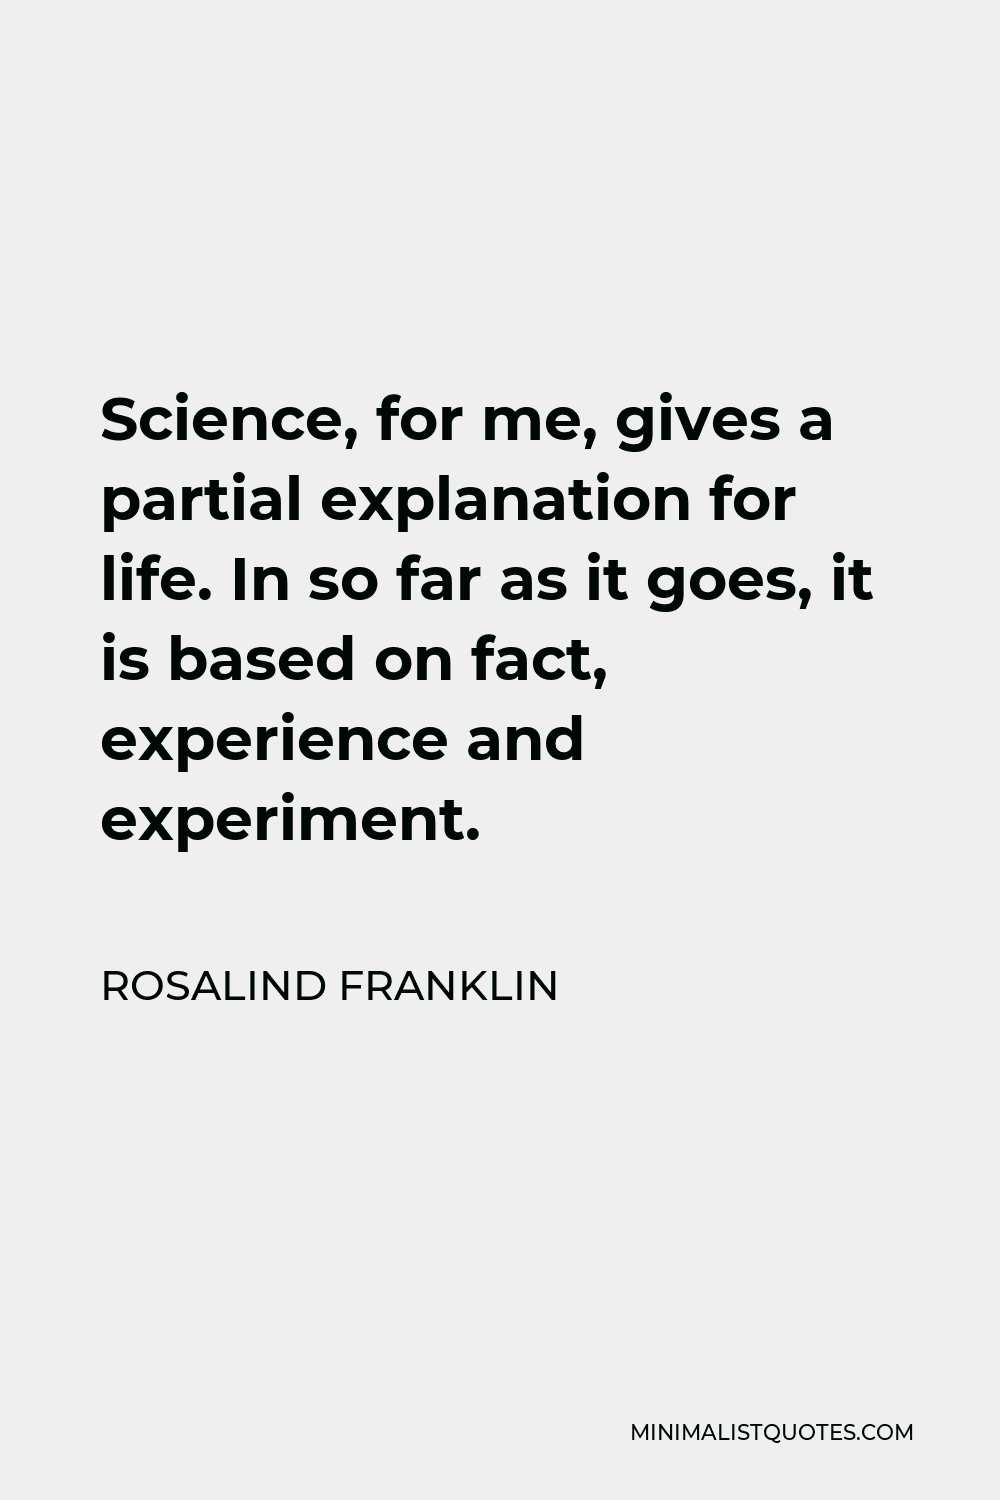 Rosalind Franklin Quote - Science, for me, gives a partial explanation for life. In so far as it goes, it is based on fact, experience and experiment.